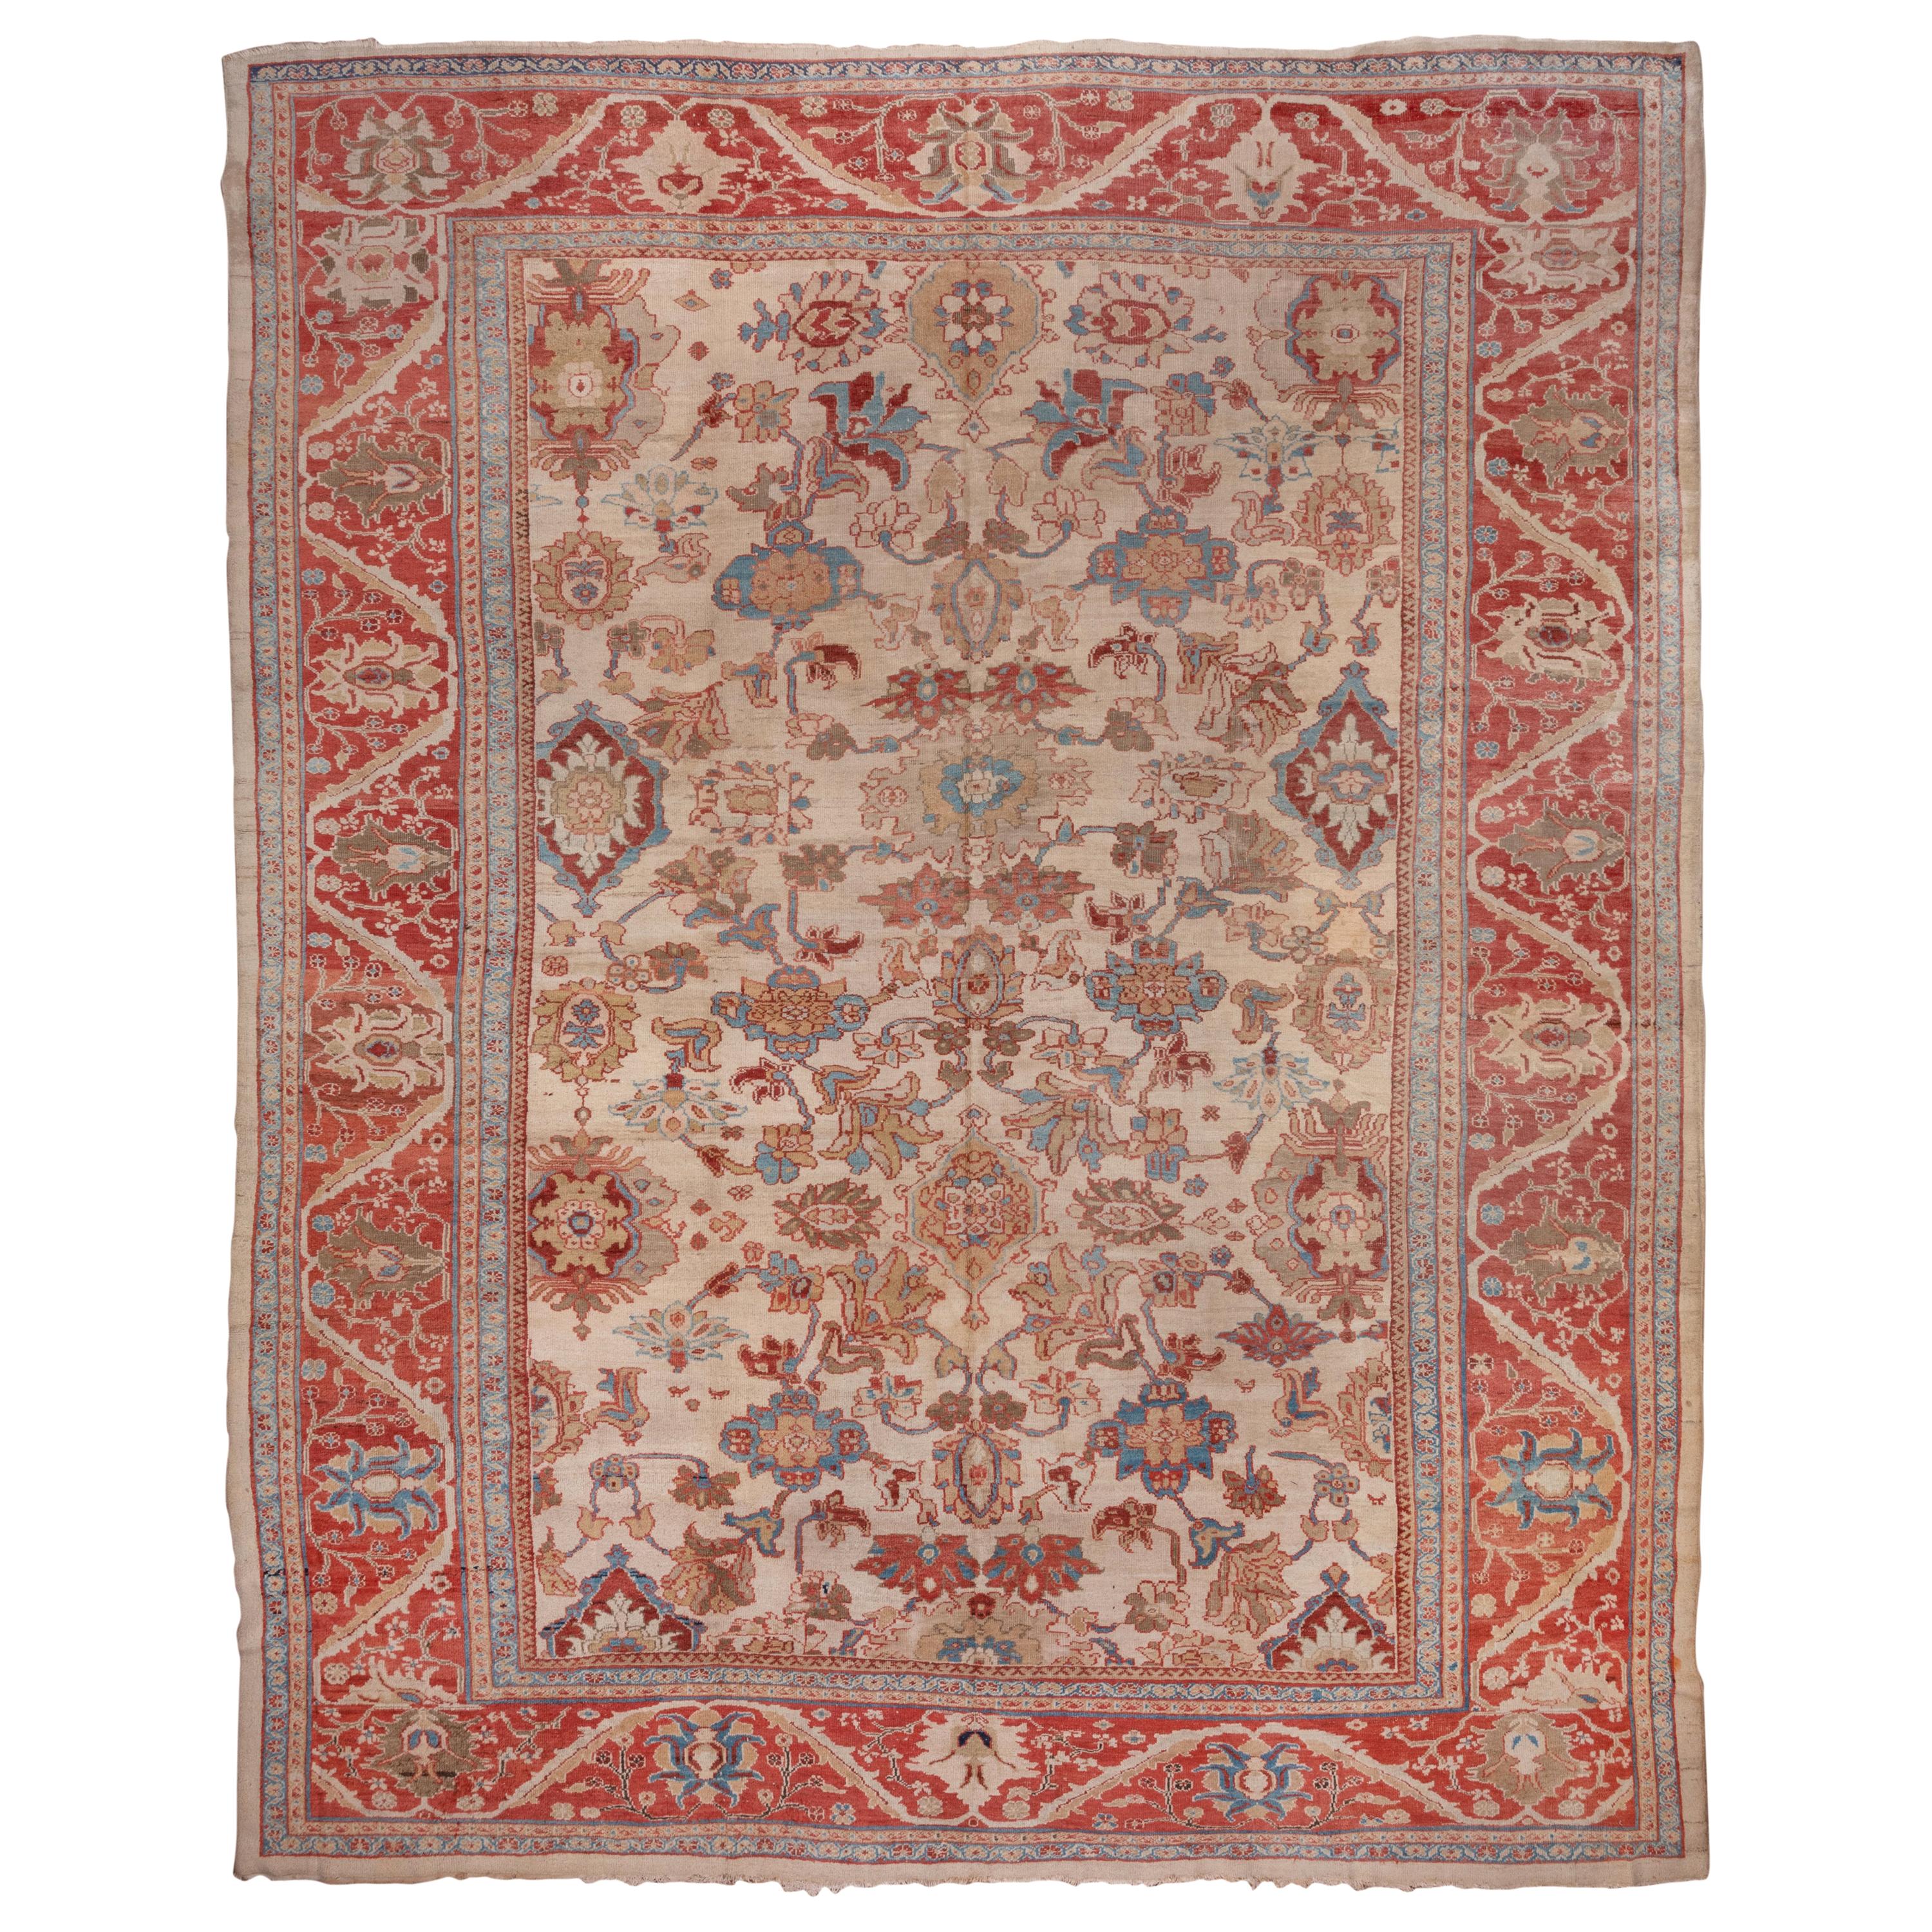 Antique Sultanabad Carpet All-Over Field, Cream Field, Bright Red & Blue Borders